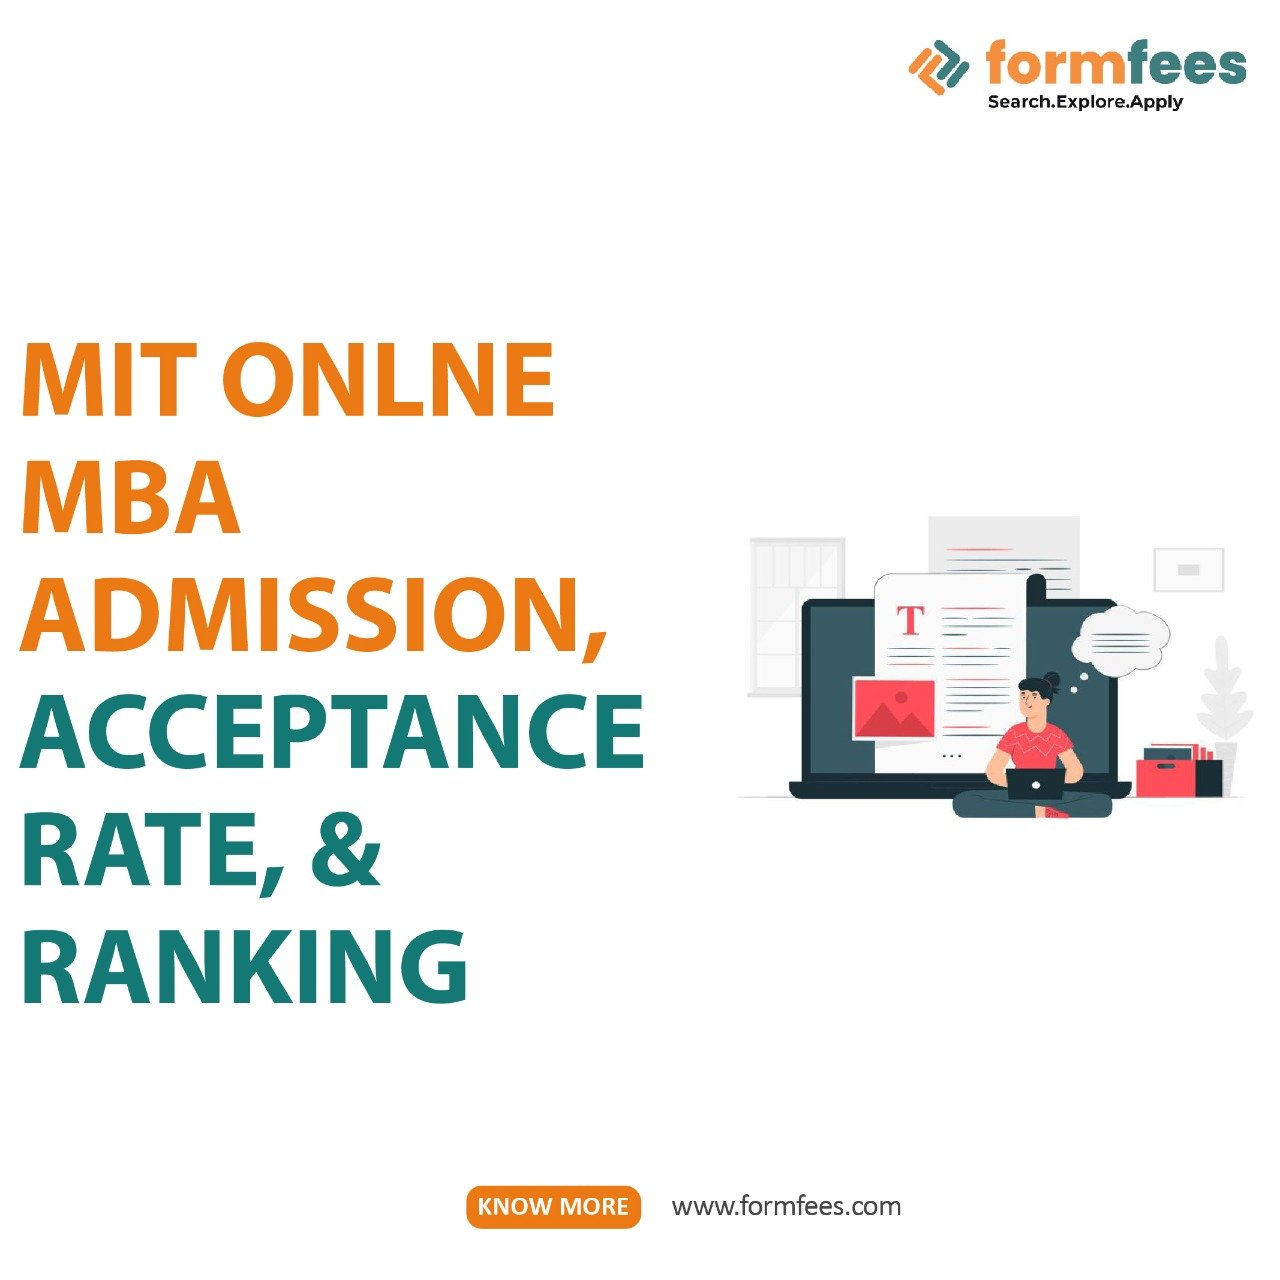 MIT Online MBA Admission, Acceptance Rate, & Ranking Formfees